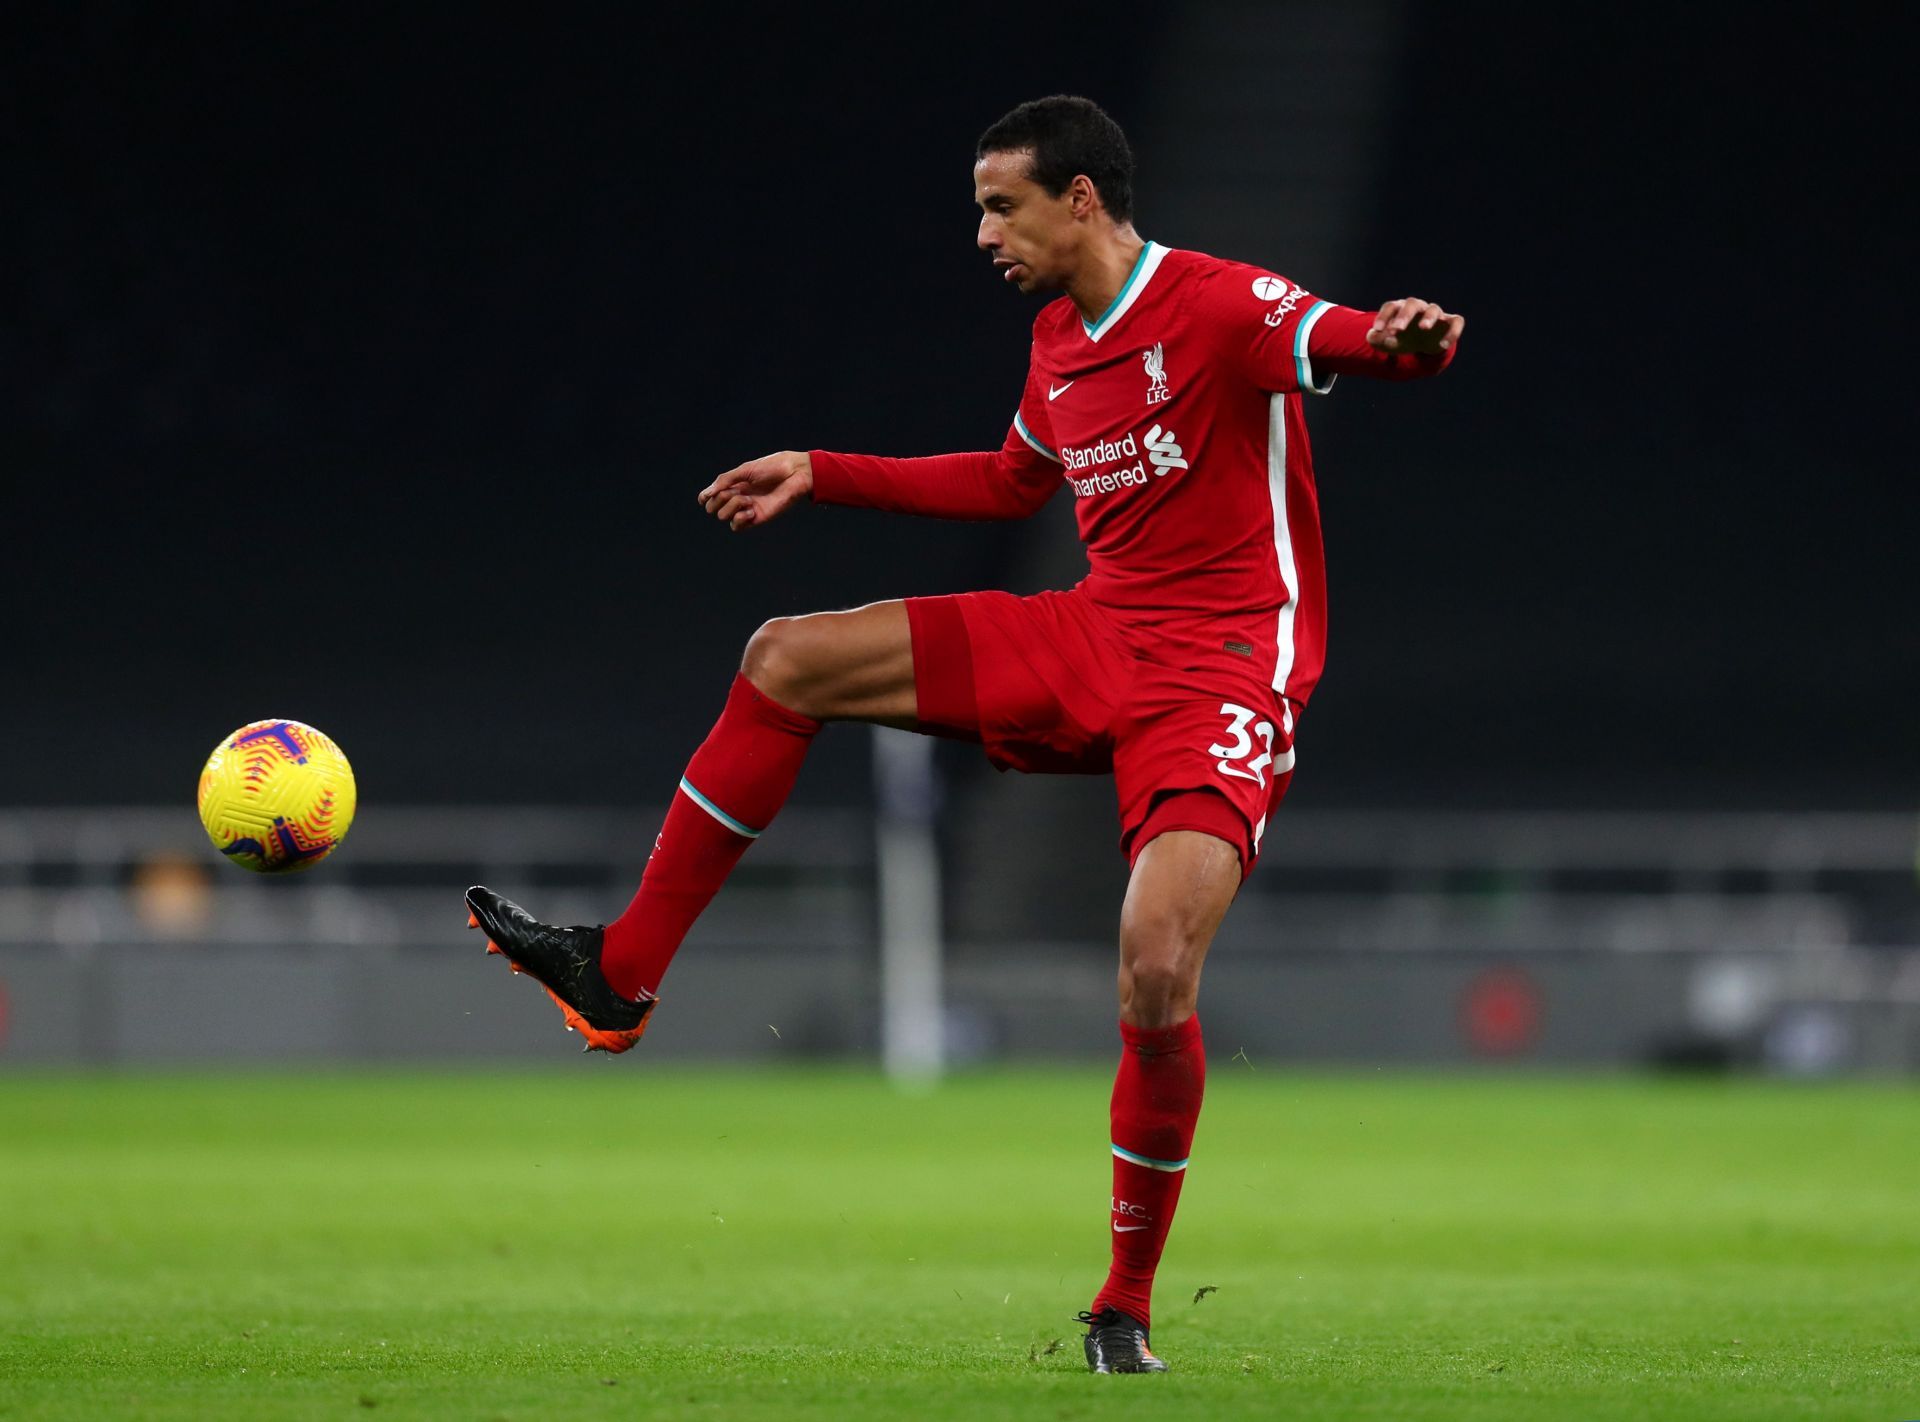 Joel Matip has emerged as one of the best players for Liverpool this season.